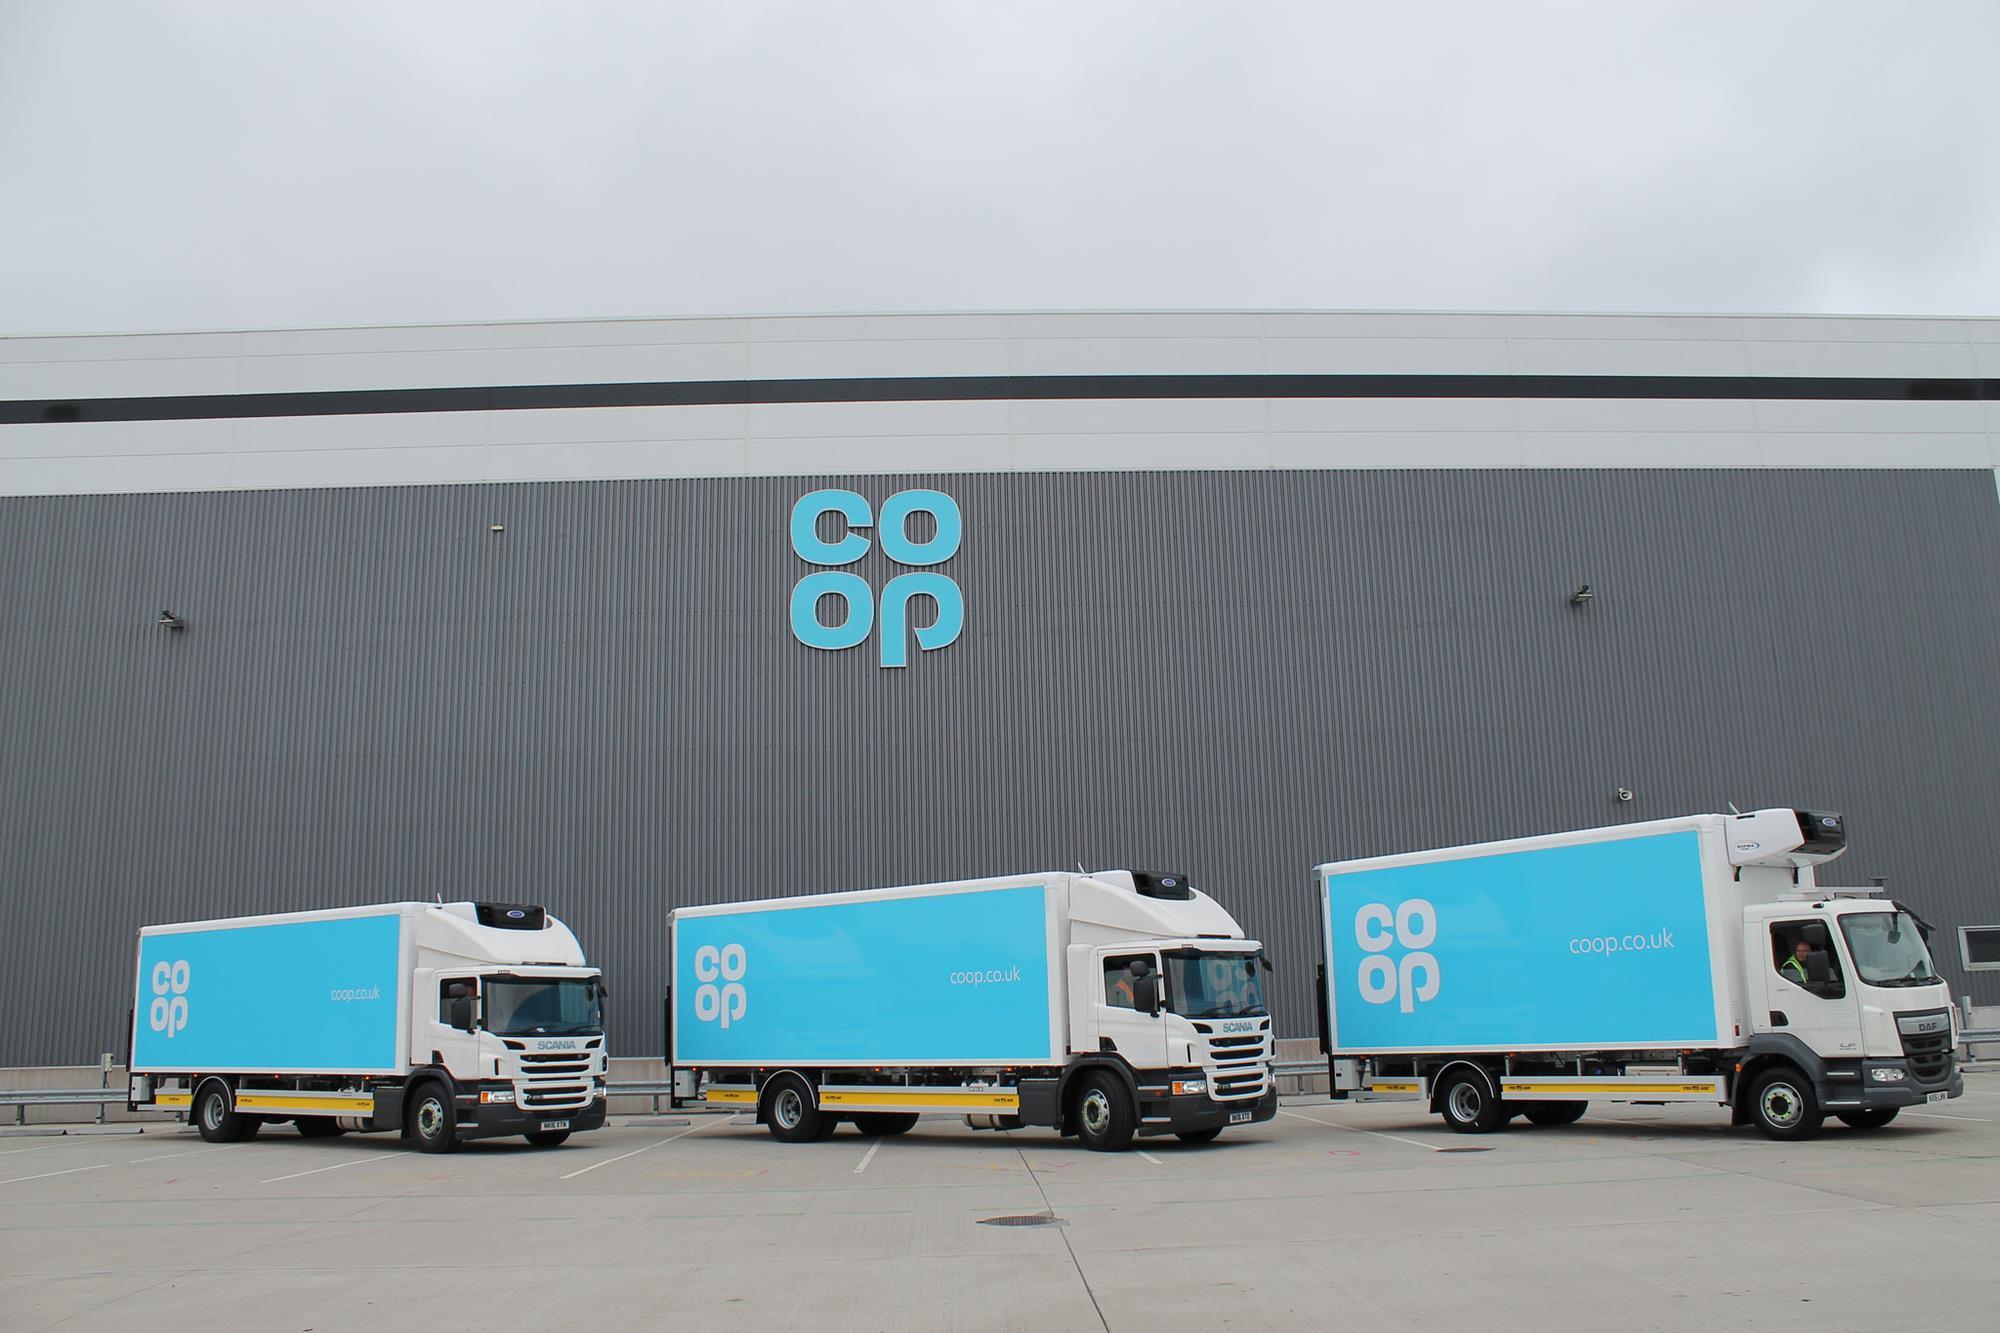 Tesco and Co-op risking tax penalty as battle for drivers